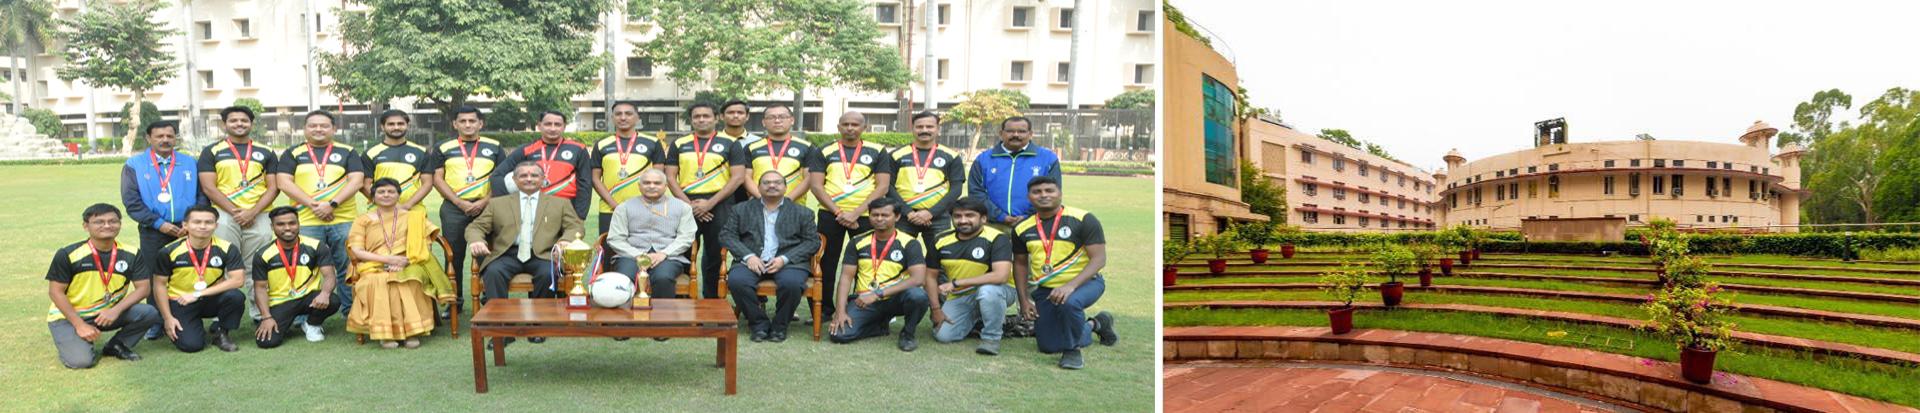 Dr. Manoj Soni, Hon’ble Chairman, UPSC, felicitating the UPSC Football Team who won the Runners-up Trophy and Player of the Series award in the Inter-Ministry Football Tournament 2022-23 (Junior Division) organized by the Central Civil Services Cultural & Sports Board (CCSCSB) from 6th October to 28th October, 2022.